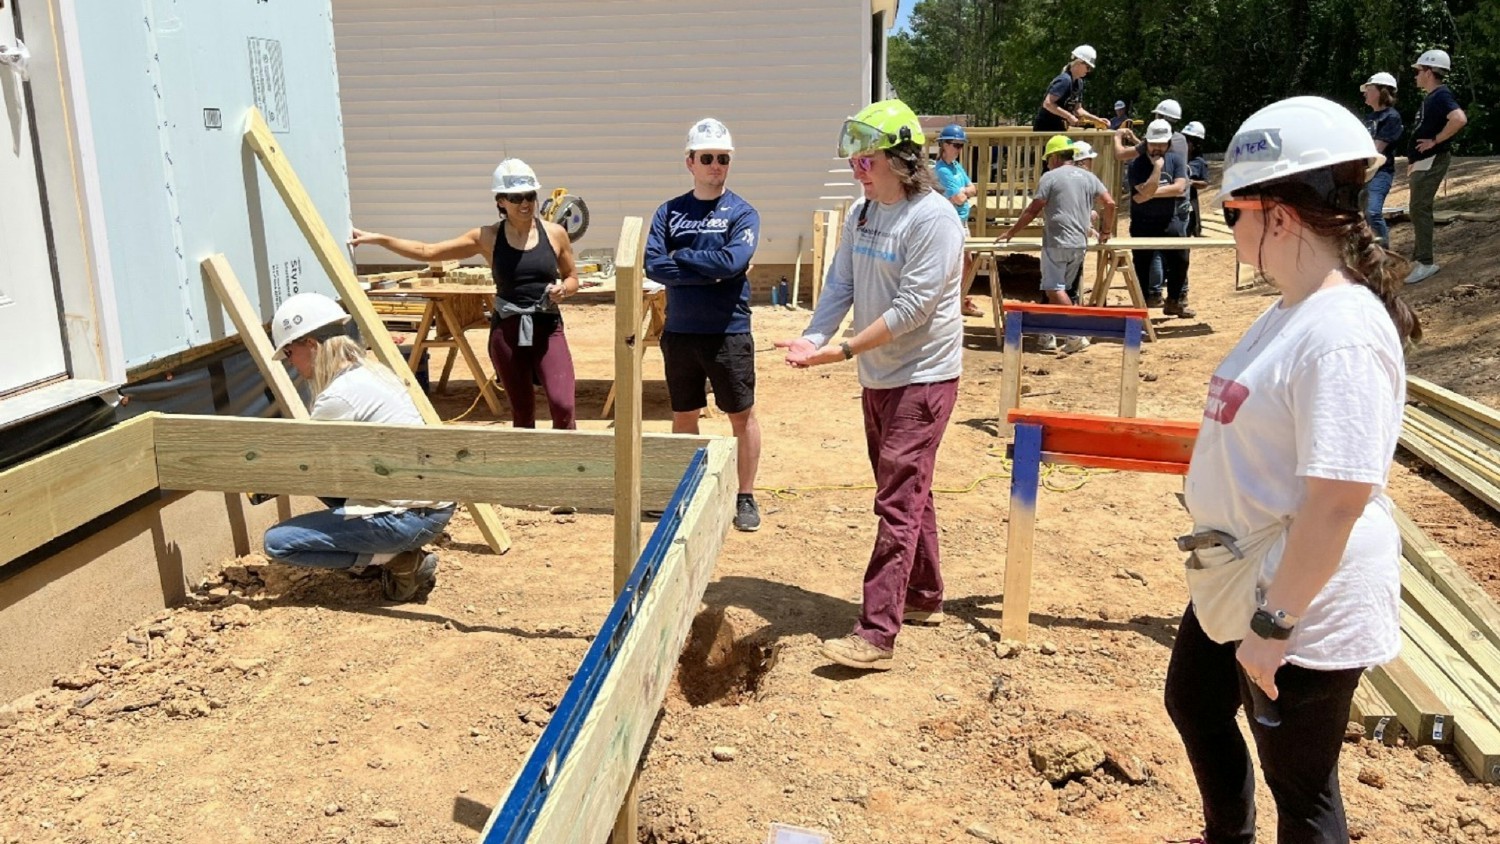 Chiesi USA Business Knowledge team participates in annual tradition supporting Habitat for Humanity Day.